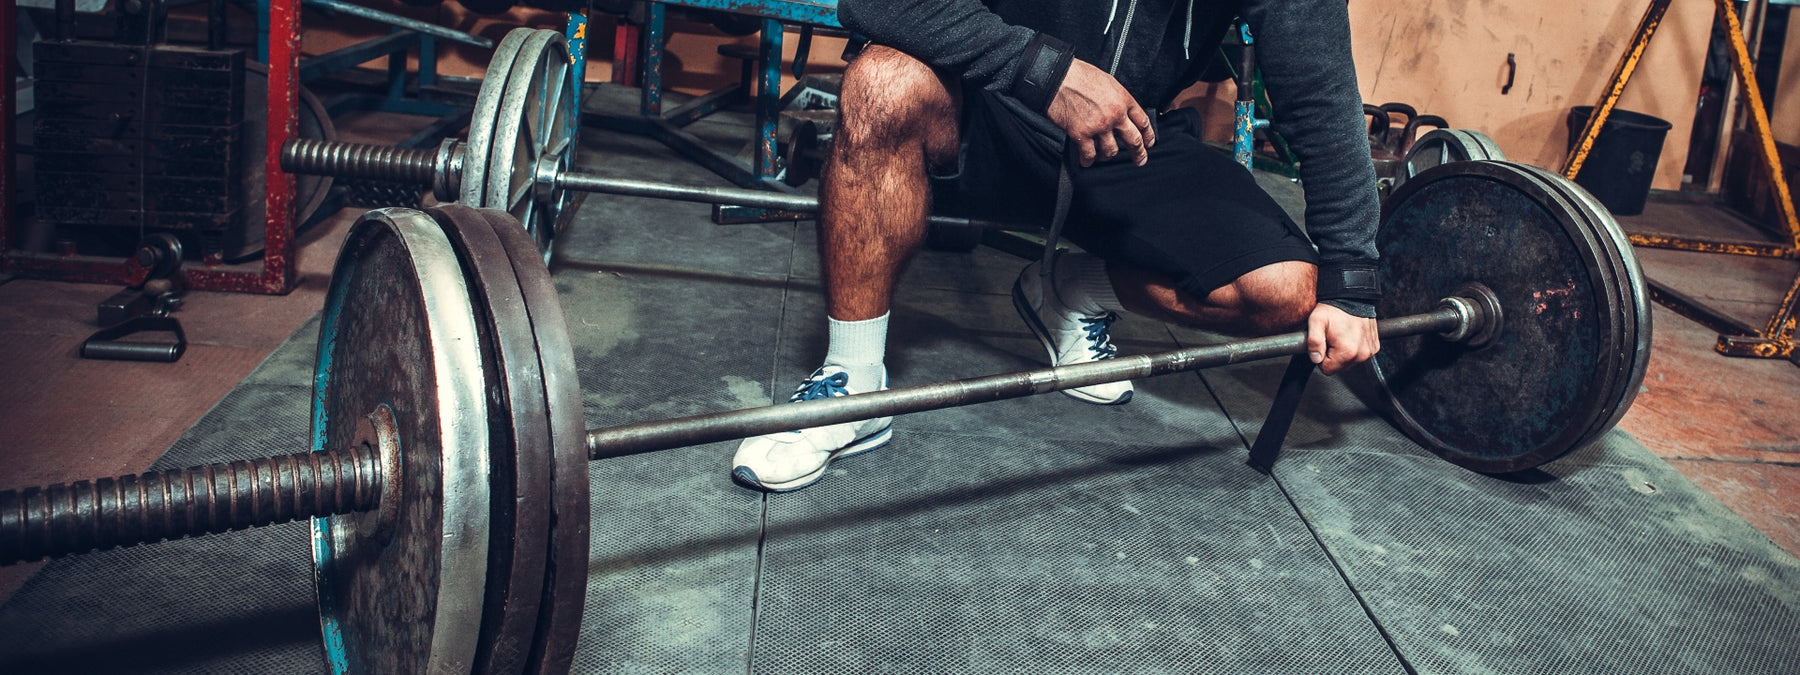 How to Perform the Yates Row, or Reverse Grip Bent Over Row